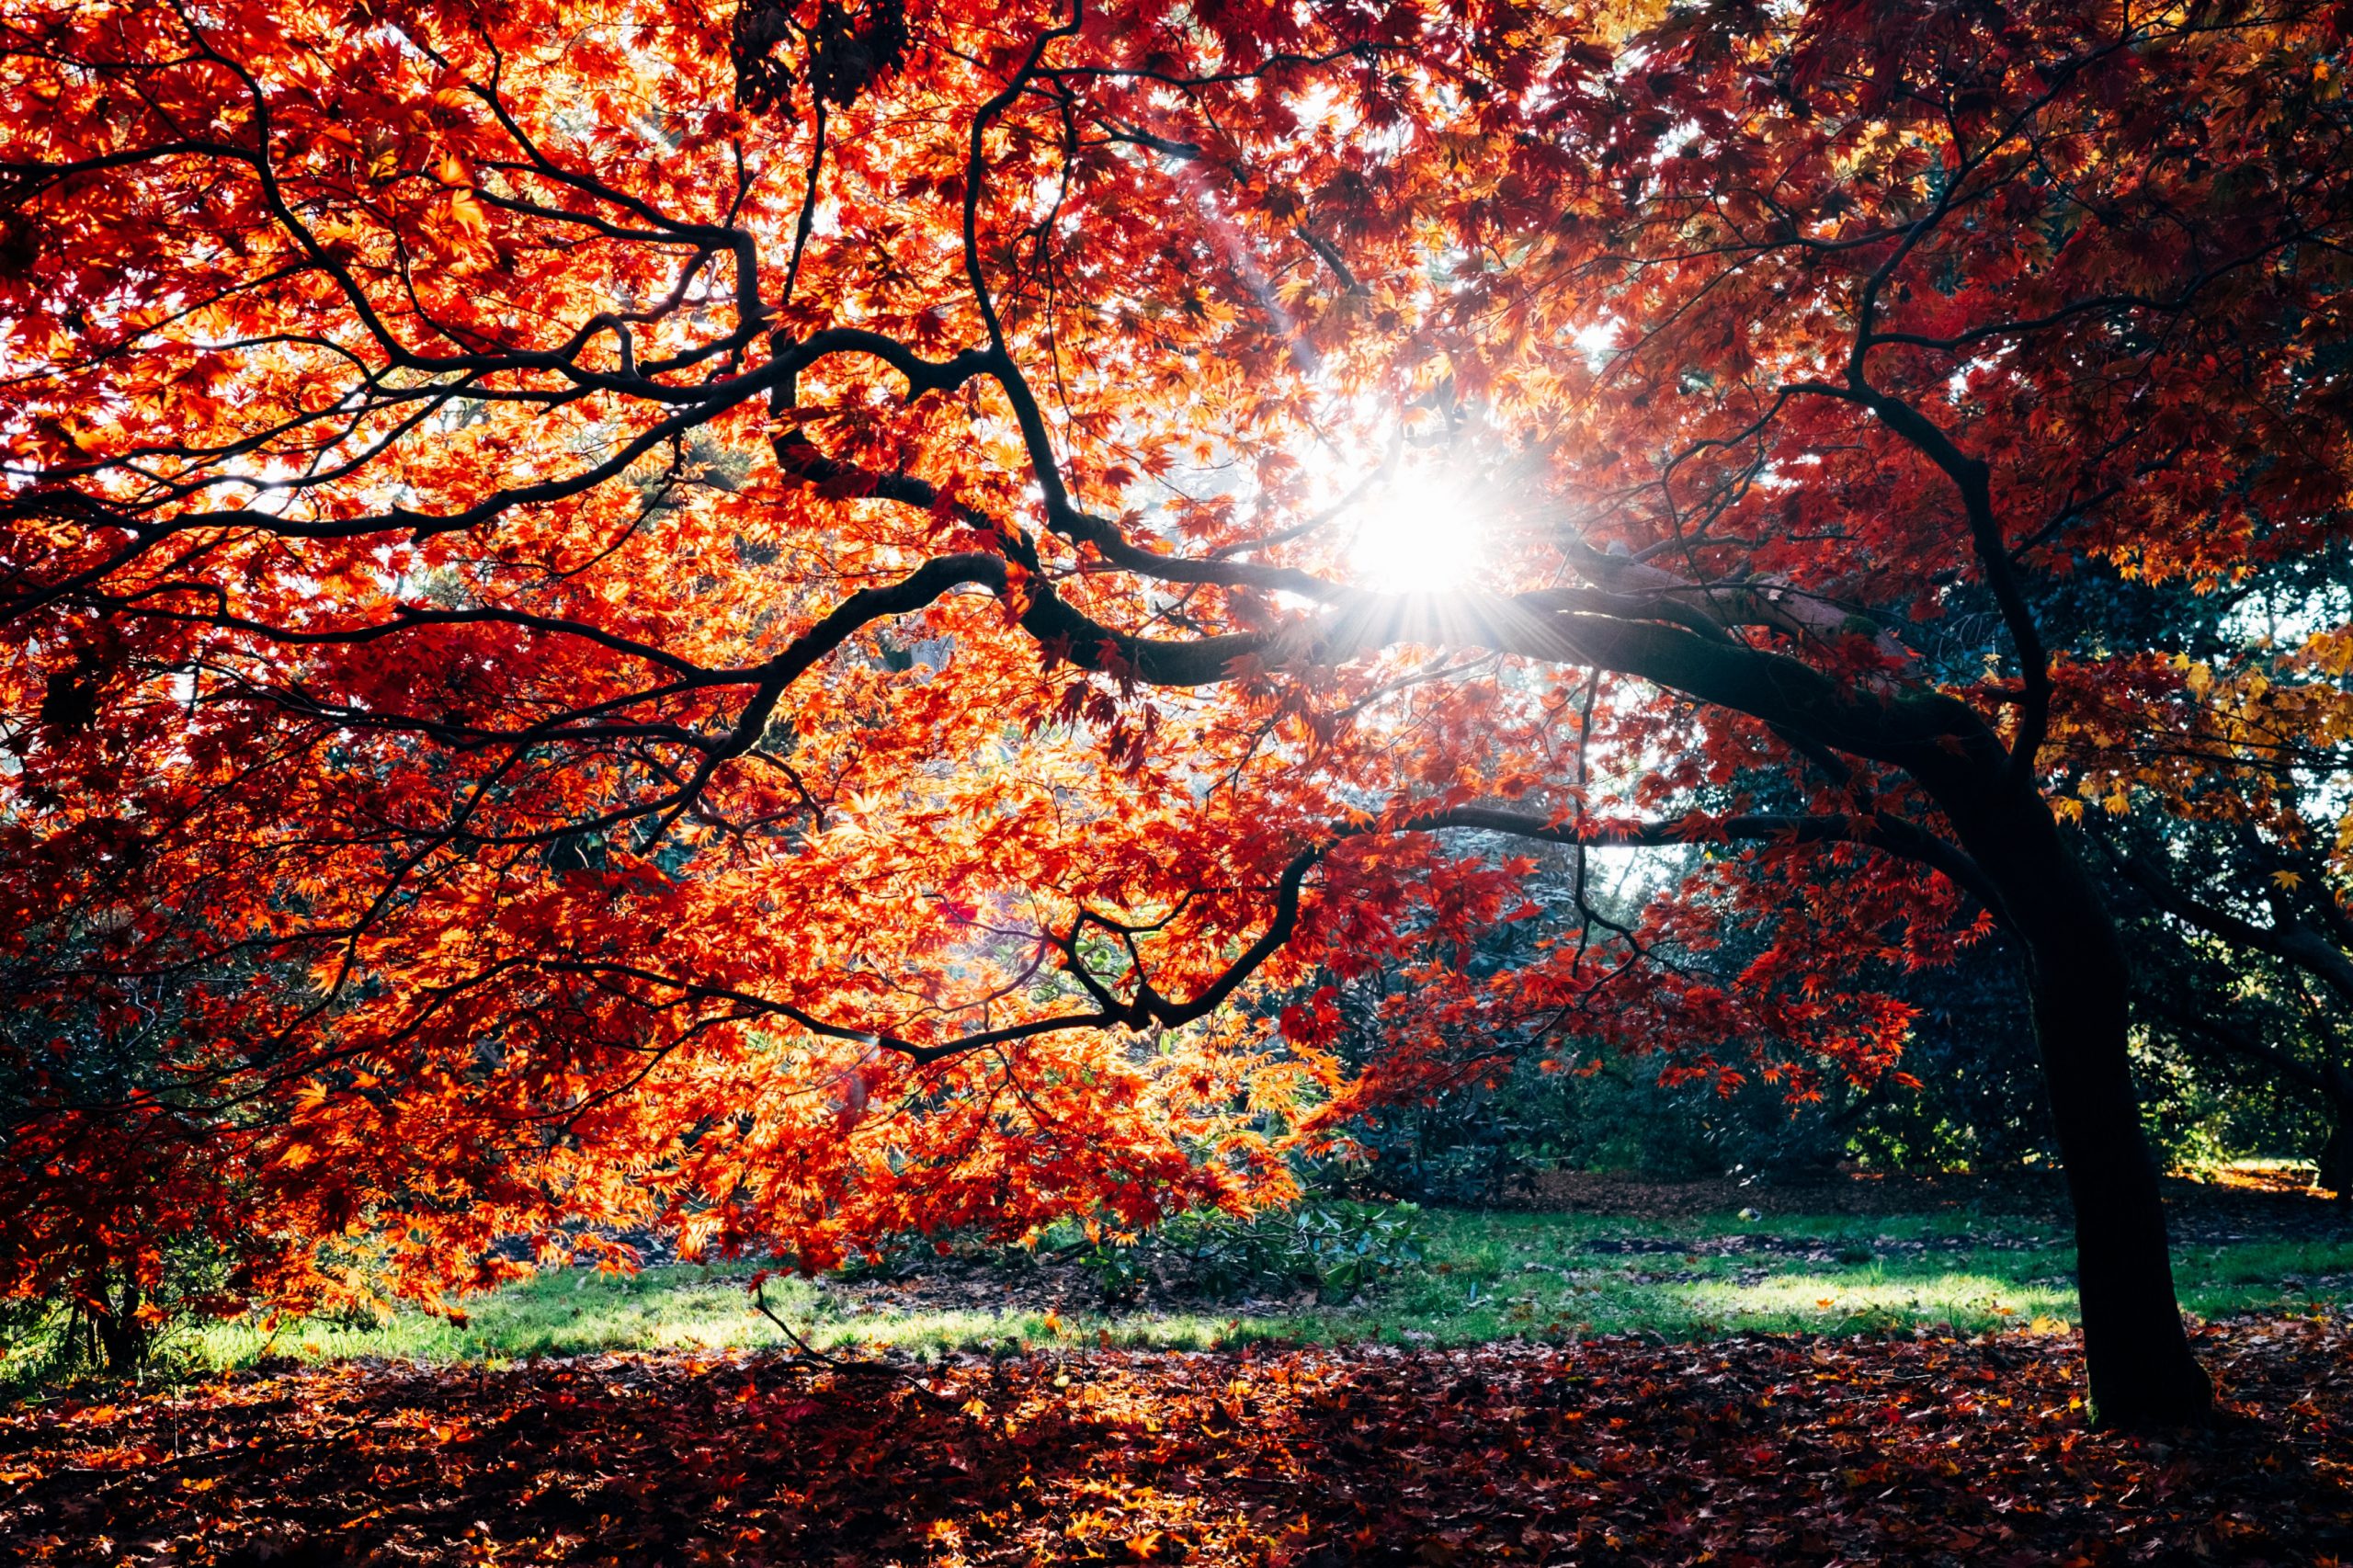 Beautiful tree with orange and yellow leaves and sun shining through